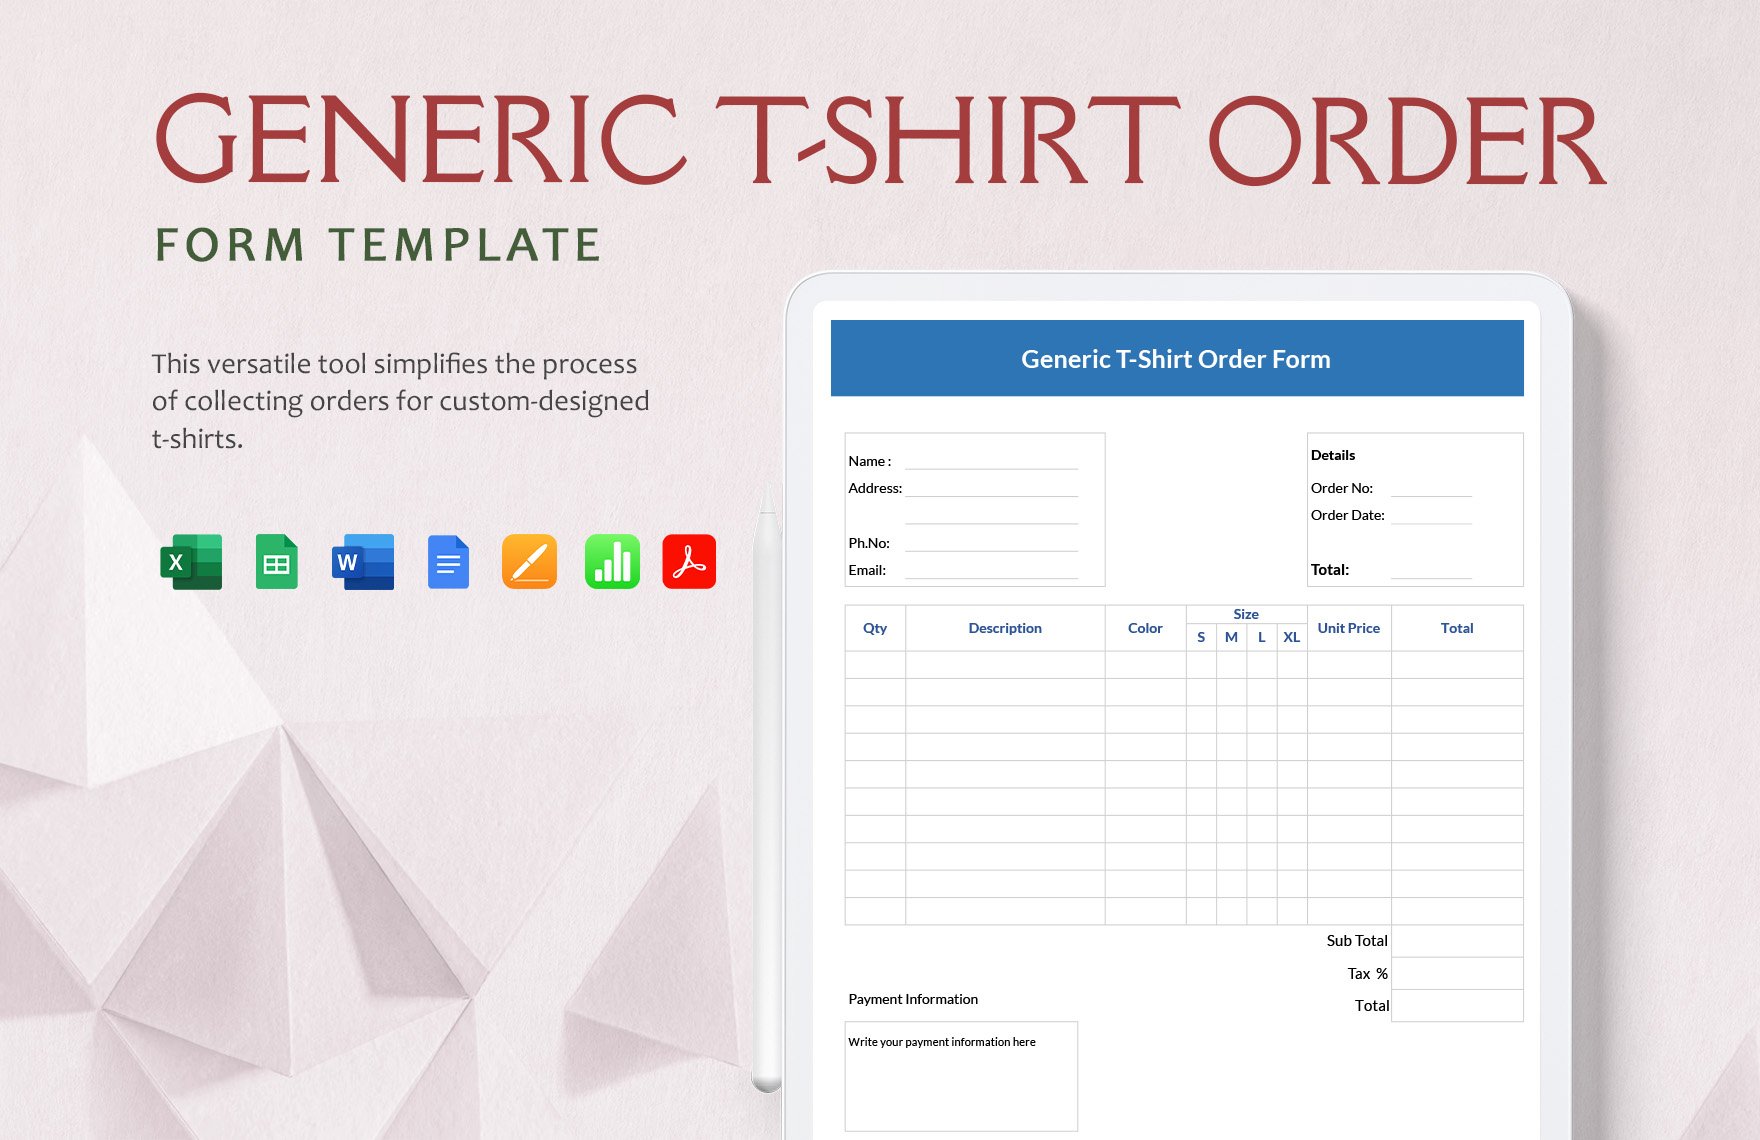 Generic T-Shirt Order Form Template in Word, Google Docs, Excel, PDF, Google Sheets, Apple Pages, Apple Numbers